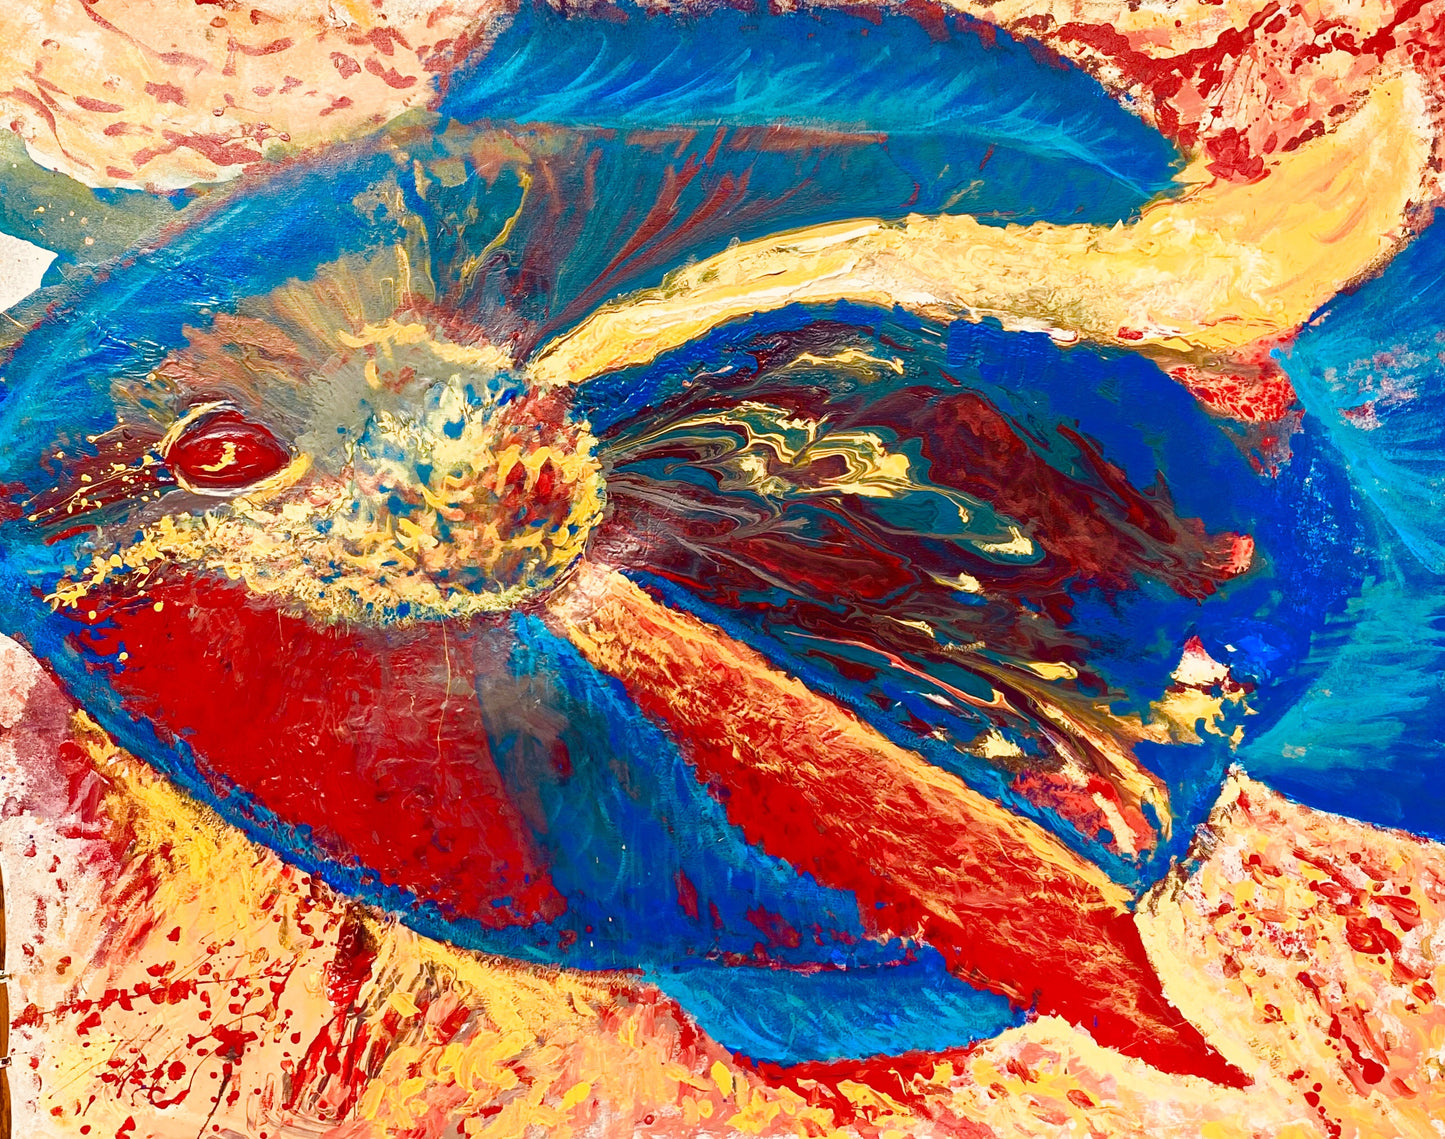 soboor- Sonarta.com During COVID-19 Quarantine, I started a series of “Live” paintings titled ”Rising Phoenix”. "Soboor" is one of these paintings and it is also a beautiful fish which covers the entire Arvandrud RIver. To celebrate the first day of spring, we served Soboor as the main dish for lunch and the leftover was served for dinner.  This is an Acrylic on Canvas painting by artist Shahla Rahimi Reynolds. Soboor is 56” H x 47” W.